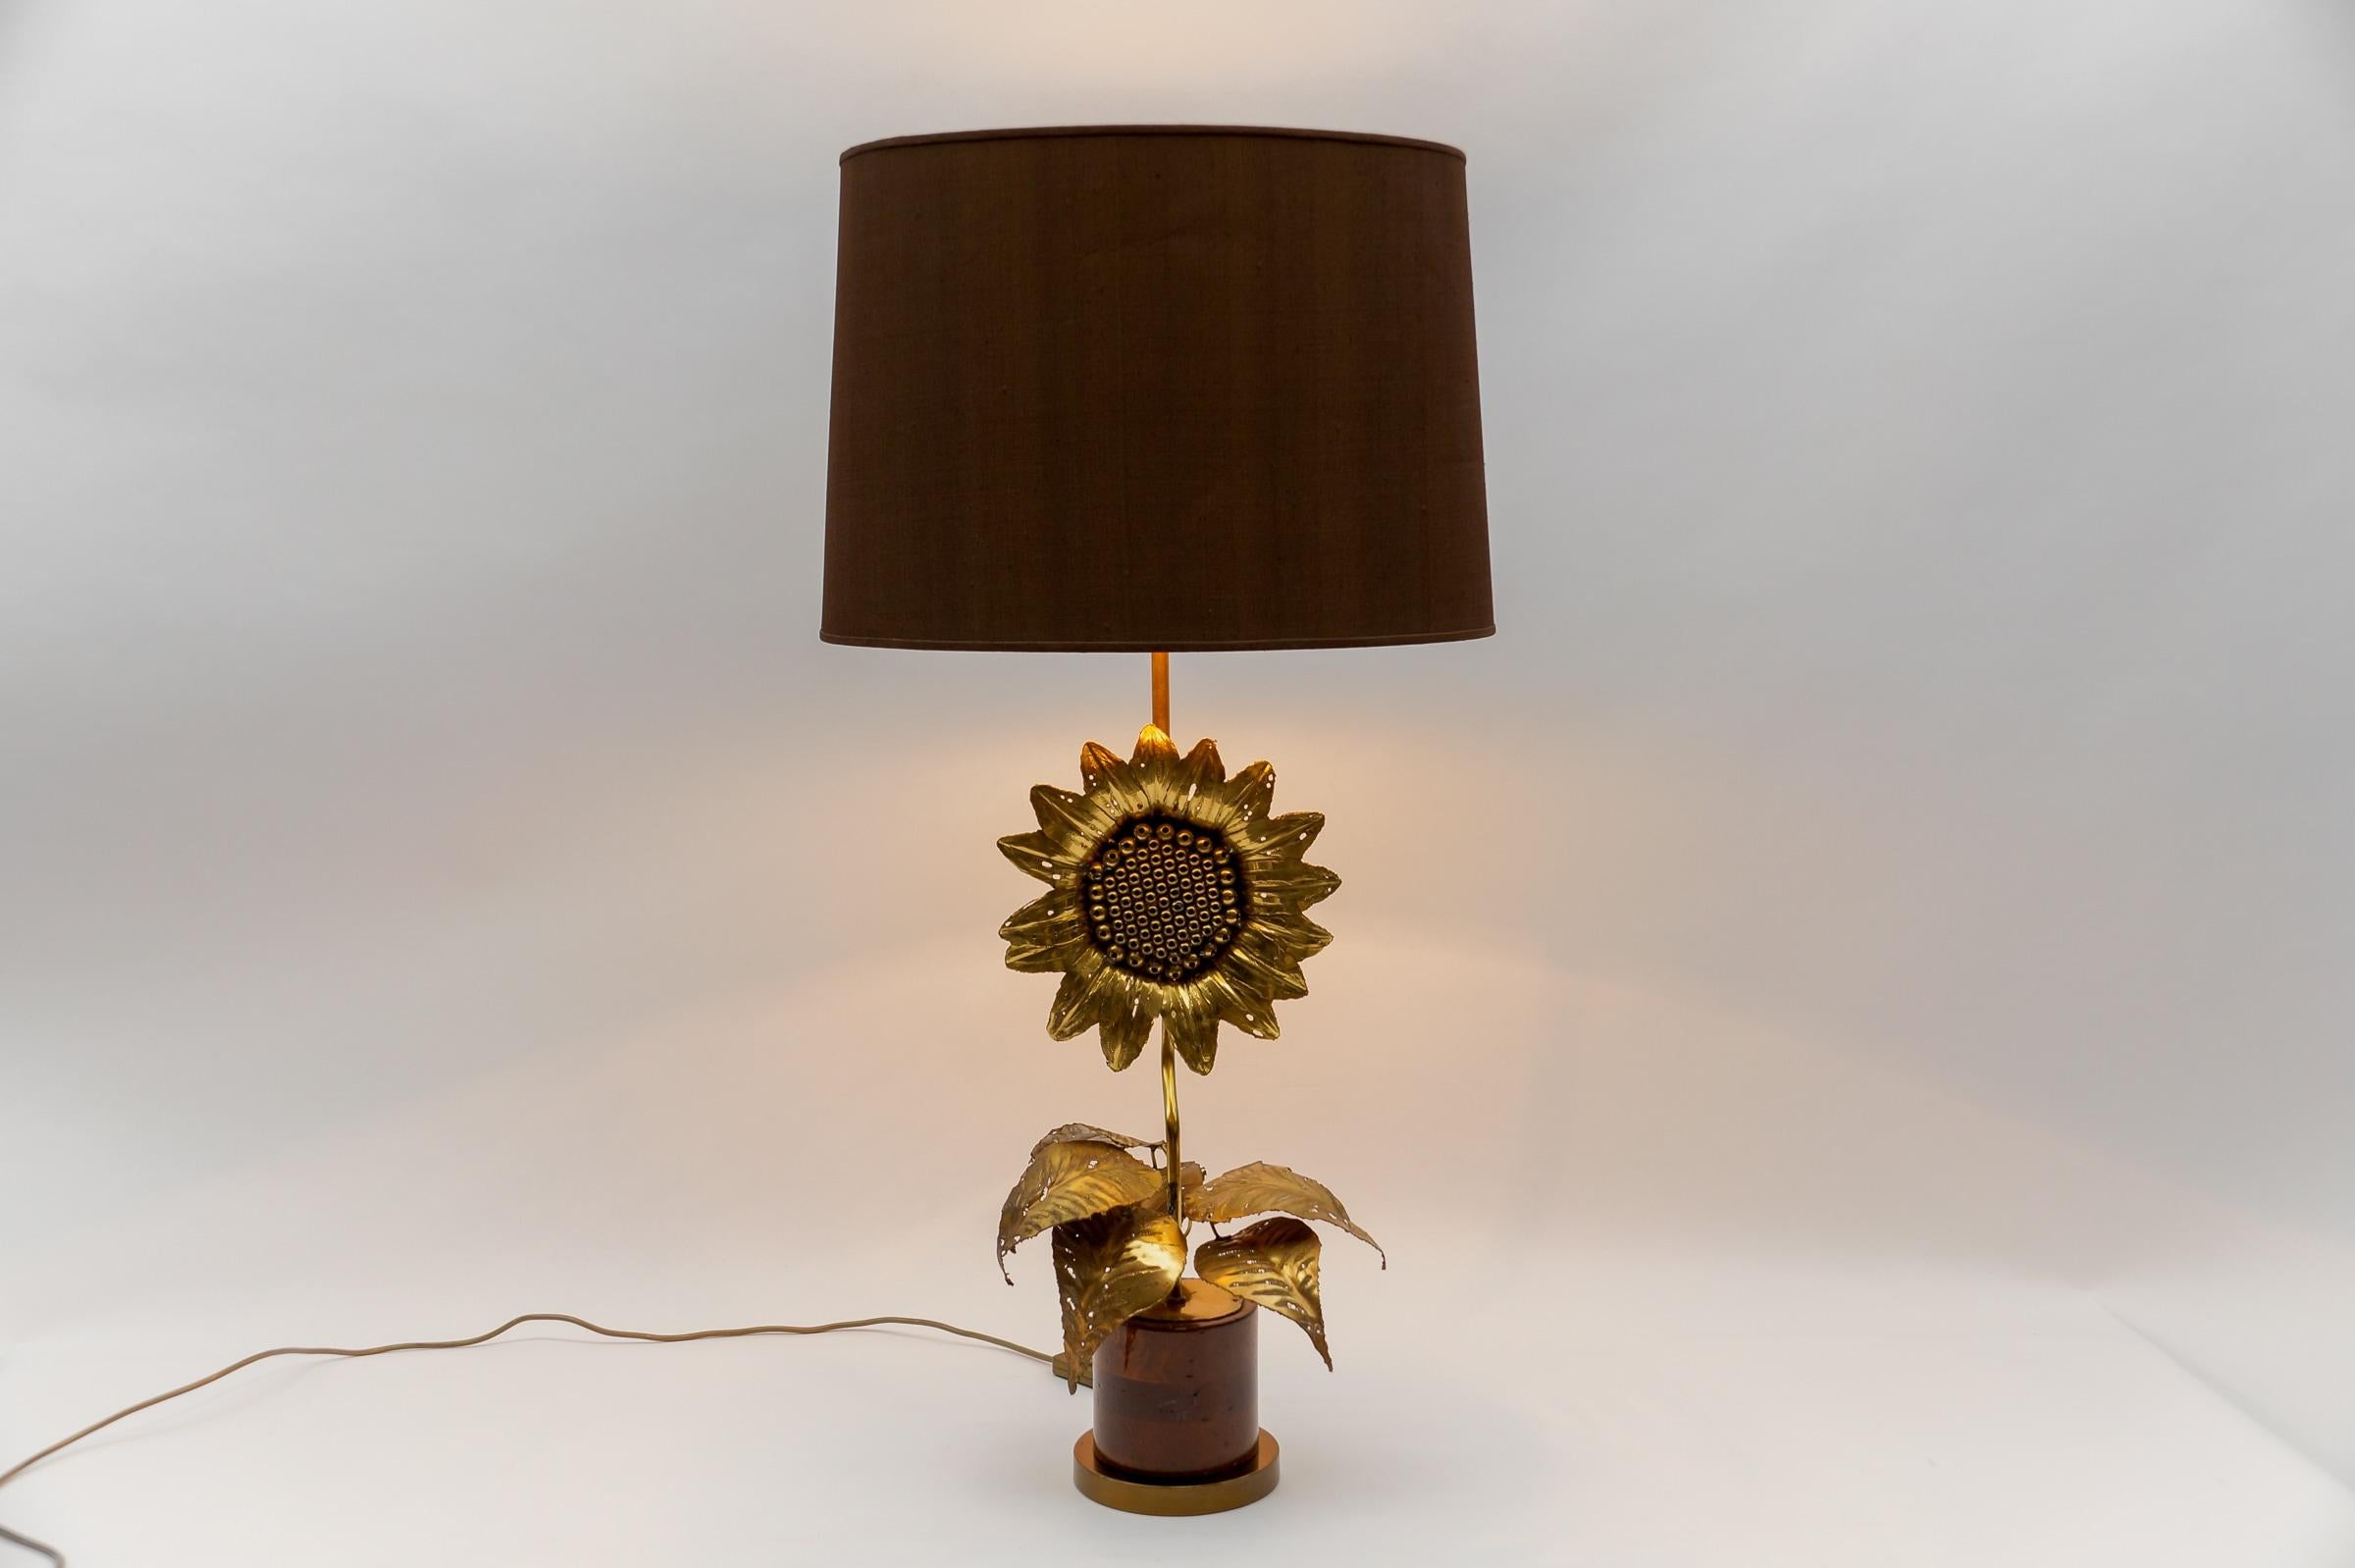 Mid-Century Modern Sunflower Table Lamp made in Brass and Wood, 1960s   In Good Condition For Sale In Nürnberg, Bayern